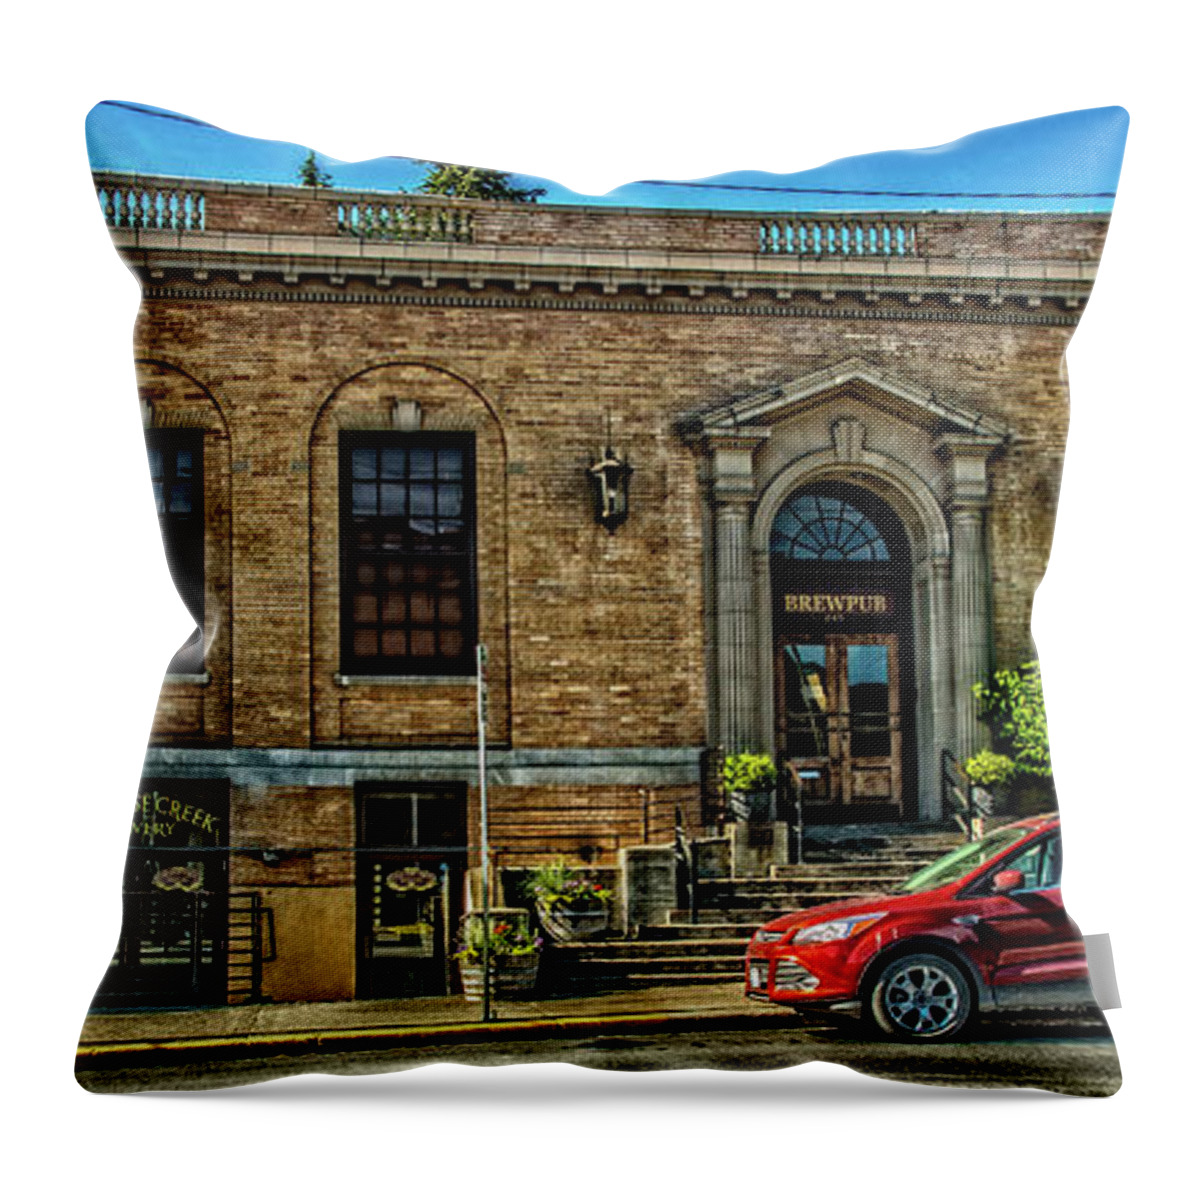 Paradise Creek Brewery Throw Pillow featuring the photograph Paradise Creek Brewery by Ed Broberg